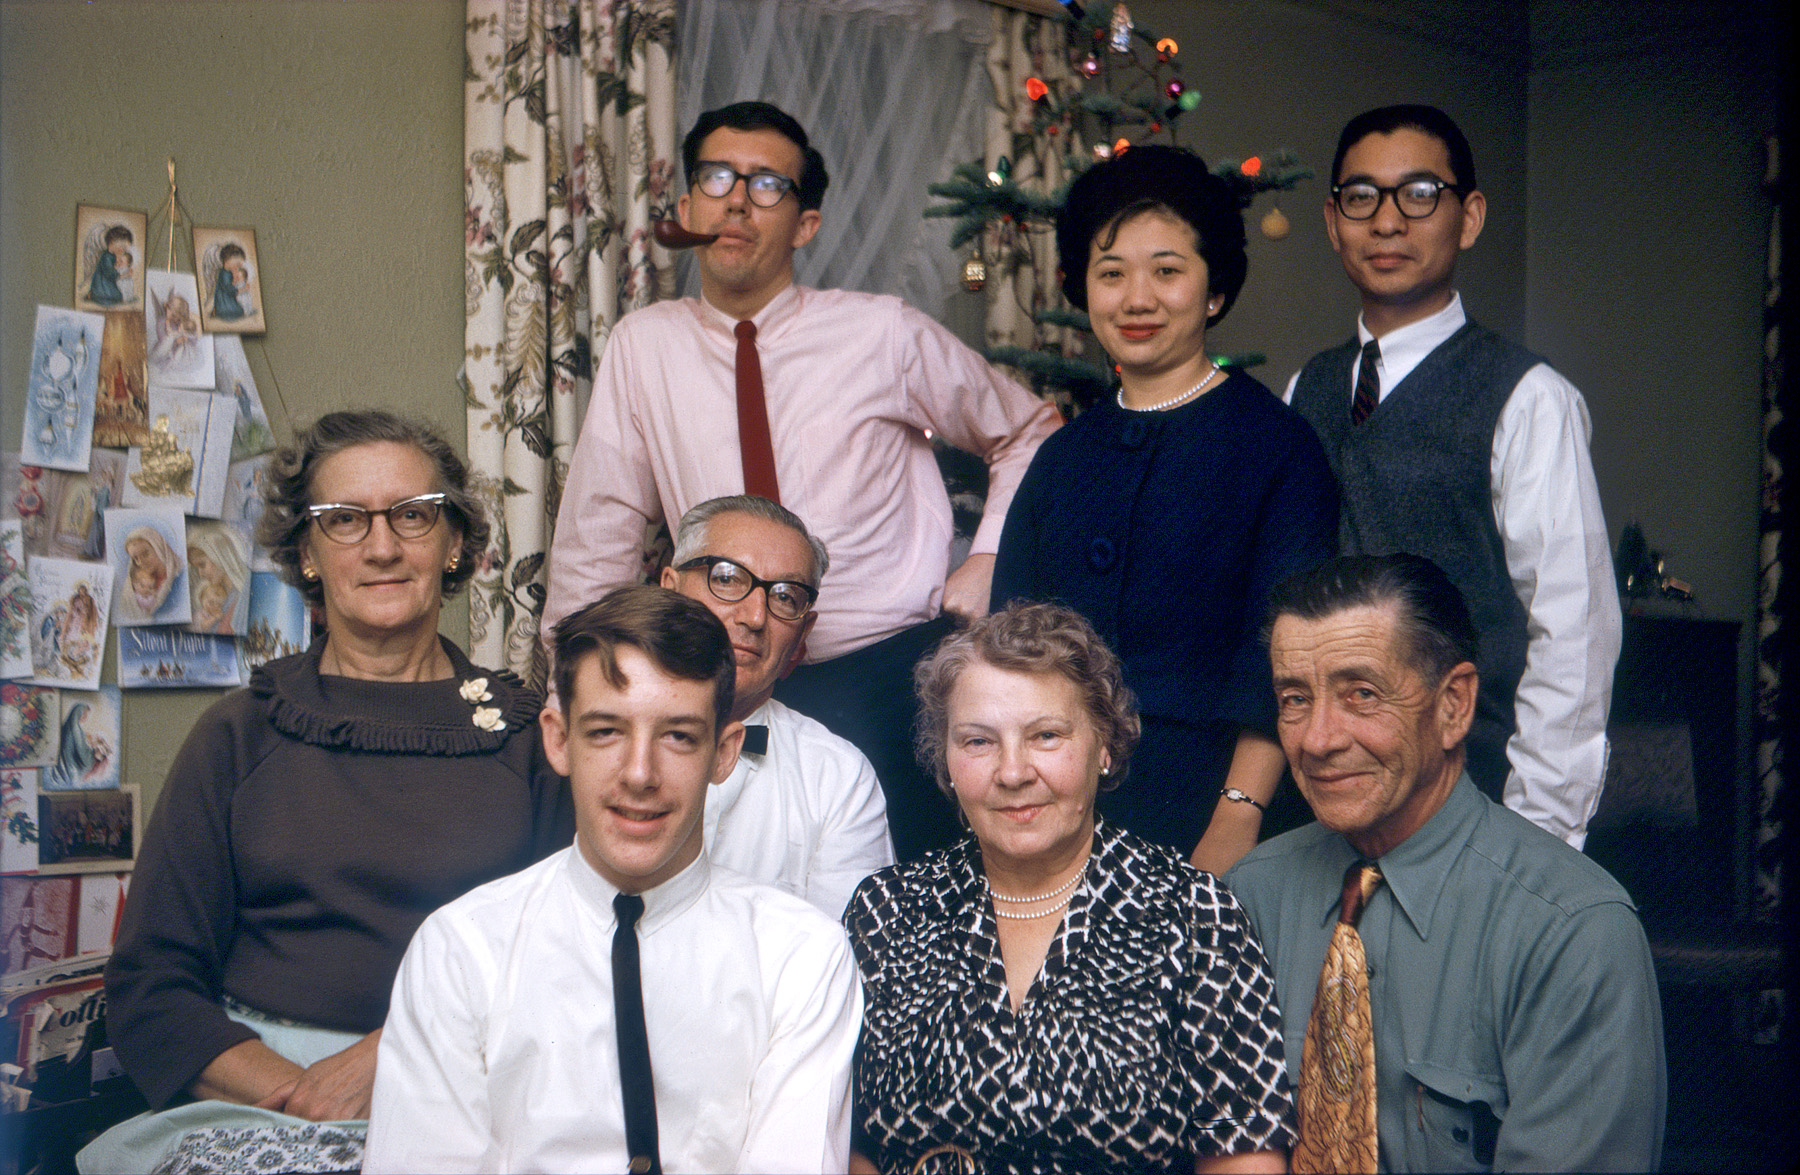 It's December 1962 and family and friends have gathered for a near-Christmas dinner. I've just gotten my first 35mm camera, a Kodak Retinette, and with the help of my trusty Kodak Master Photoguide, manage to ace this Kodachrome bounce-flash exposure. That's me, age 16, strategically positioned in front of my father, who's still in his supermarket work garb, so it's obviously not Christmas day. Next to me in front are Aunt Grace and Uncle Jack, my mother's oldest brother. At the time I probably thought his shirt/tie combo was corny, but now I love it. Mother's on the left looking pleased, perhaps because the serendipitous arrival of identical cards made for a pleasing symmetry in her card tree on the wall. In back, my brother and our friends Colleen and Bob. Bob had been my brother's Cal Poly college mate, and later lived with us a bit before marrying Colleen. View full size.